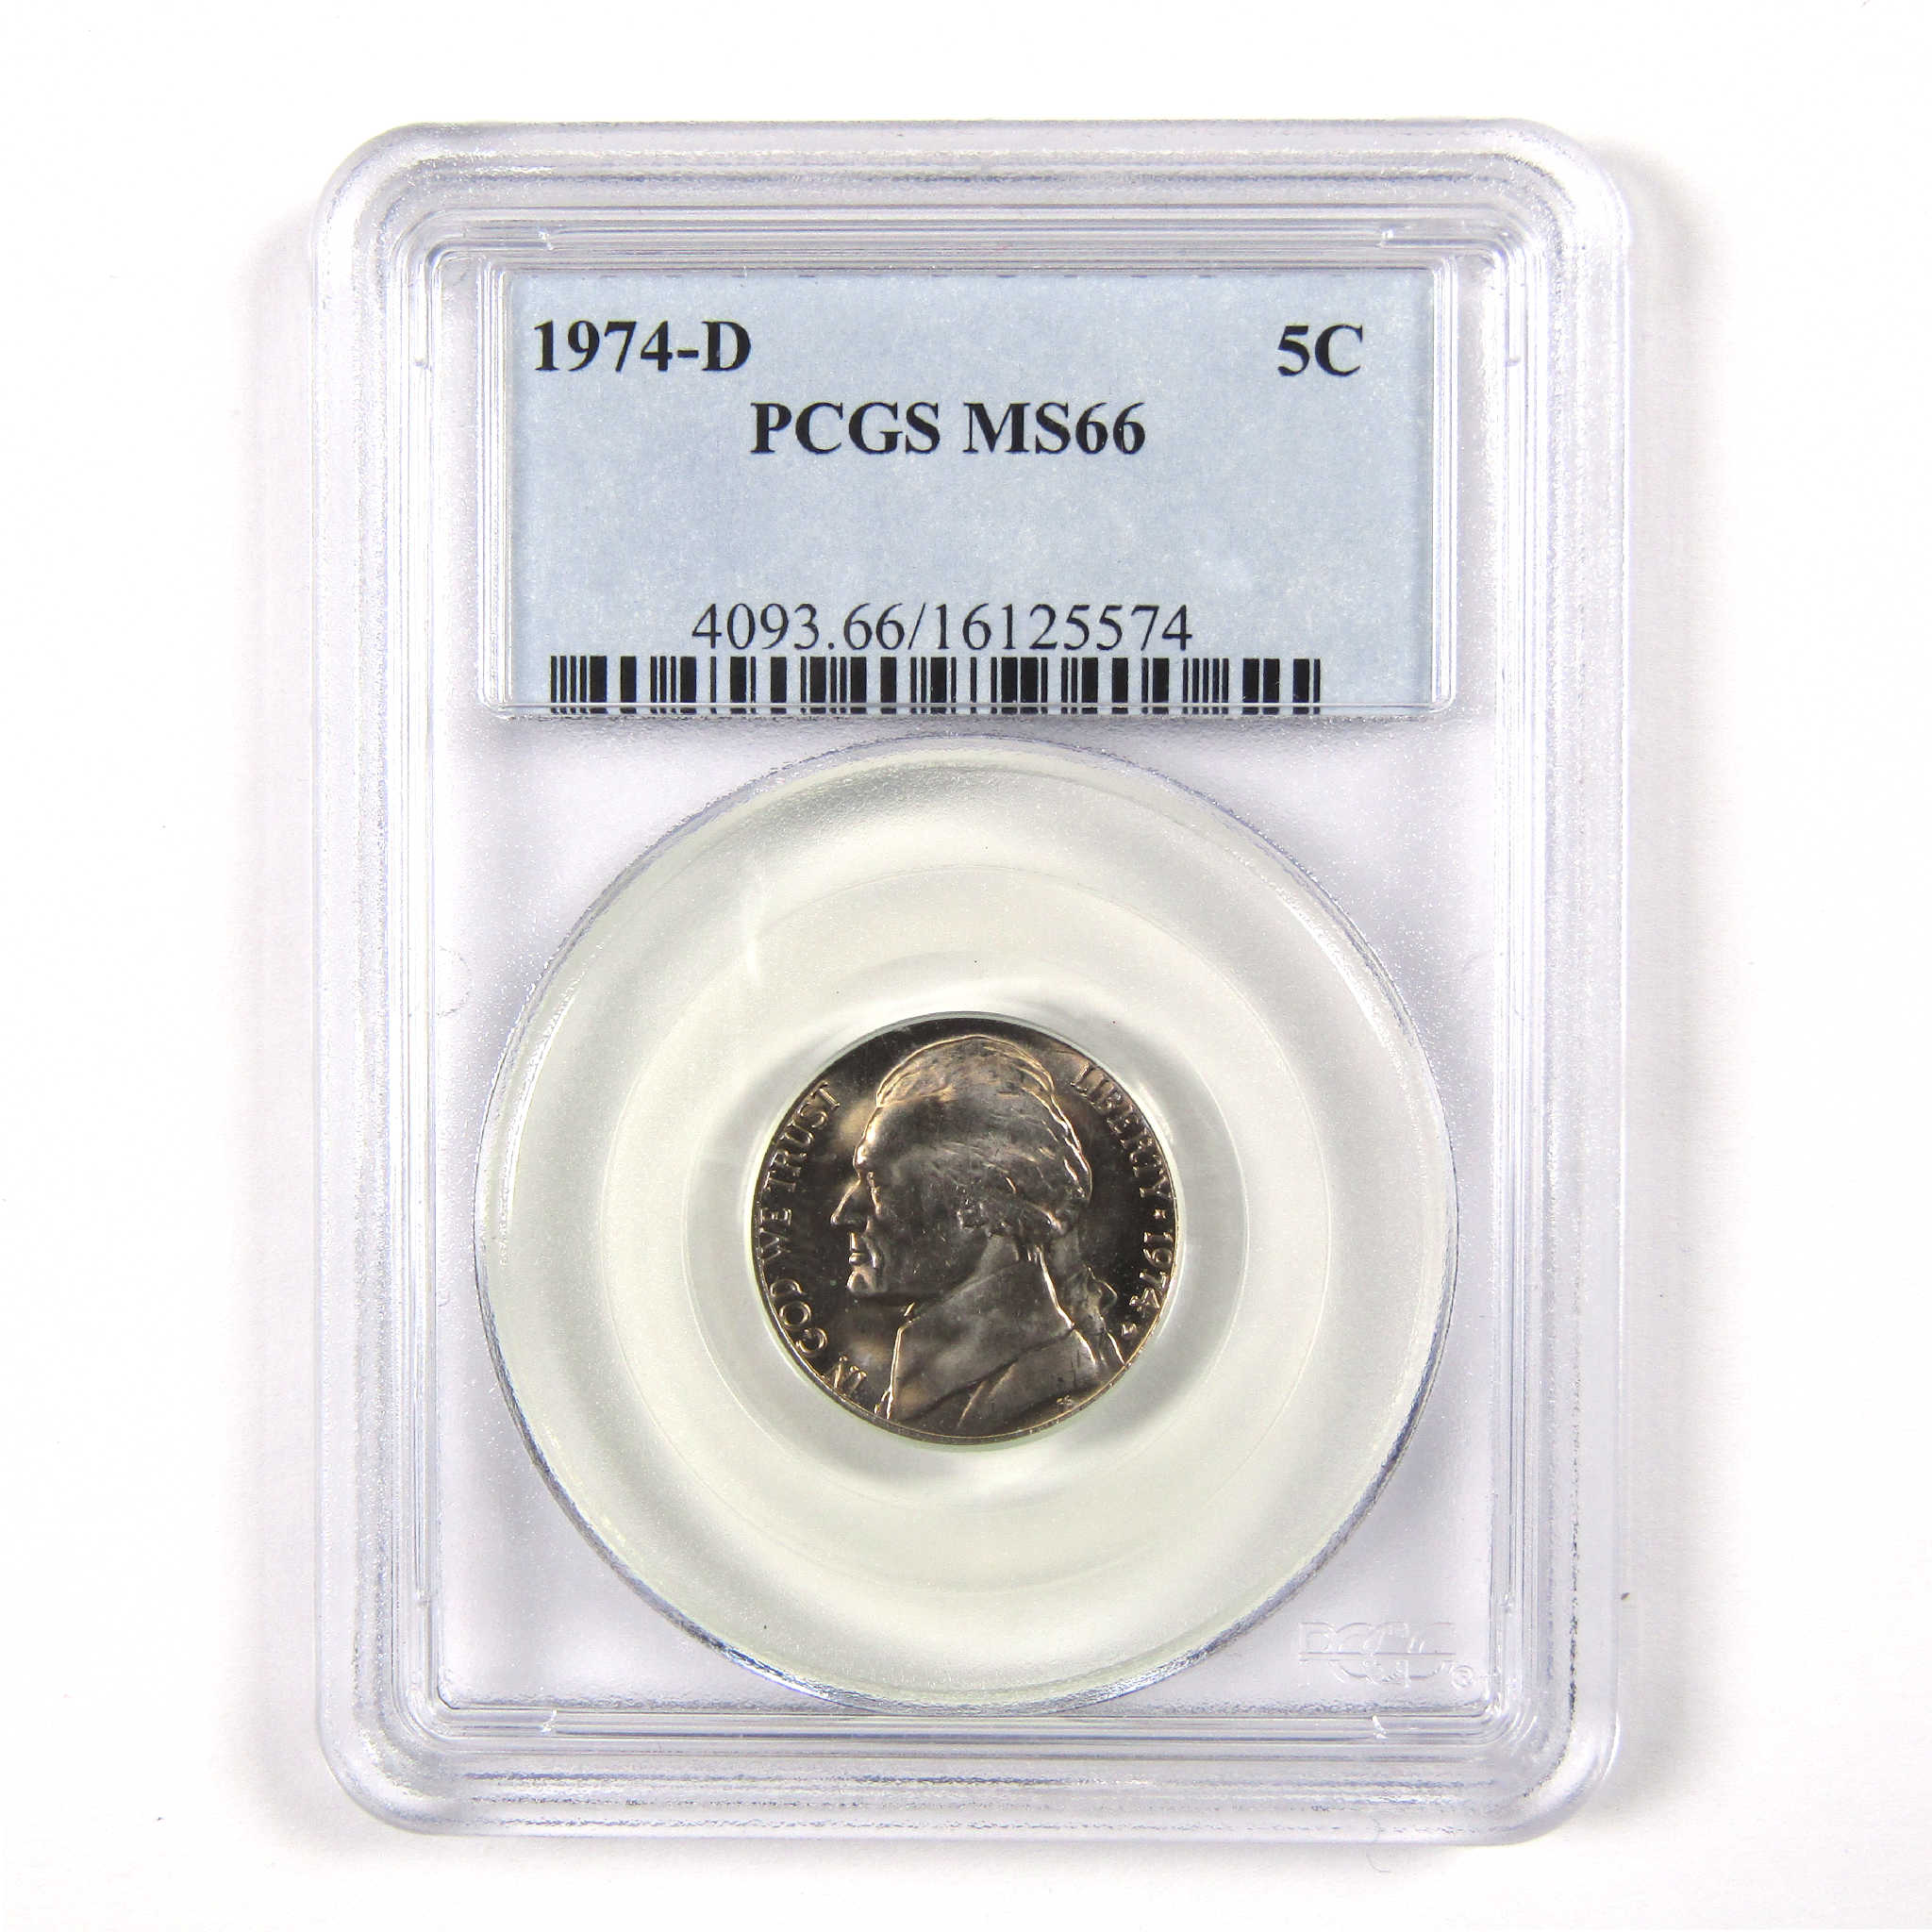 1974 D Jefferson Nickel MS 66 PCGS 5c Uncirculated Coin SKU:CPC5465